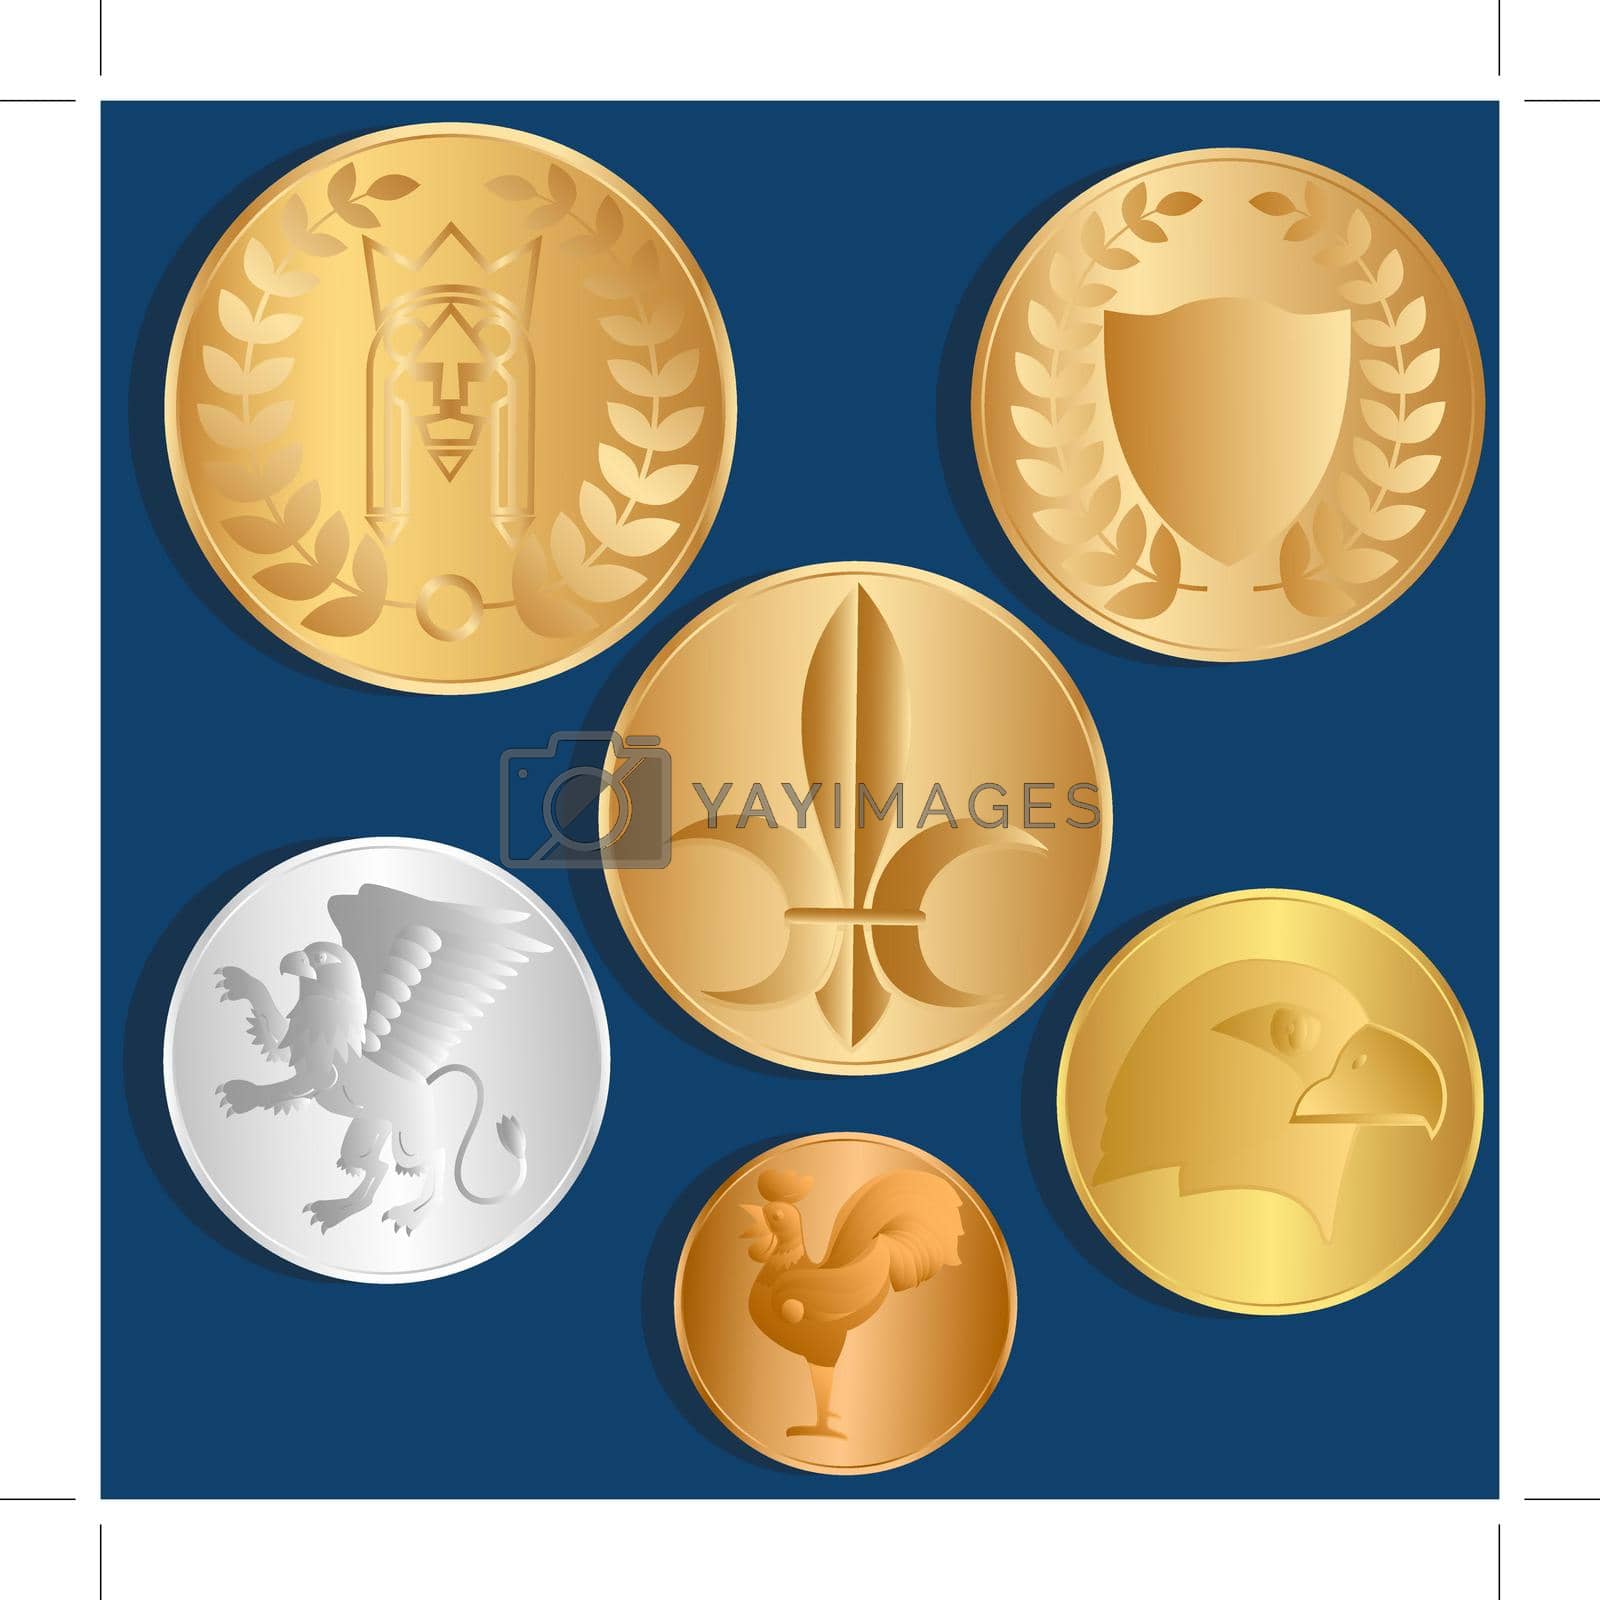 Royalty free image of Different metal coins. Blue background. Vector. by Nikolaiev_Oleksii